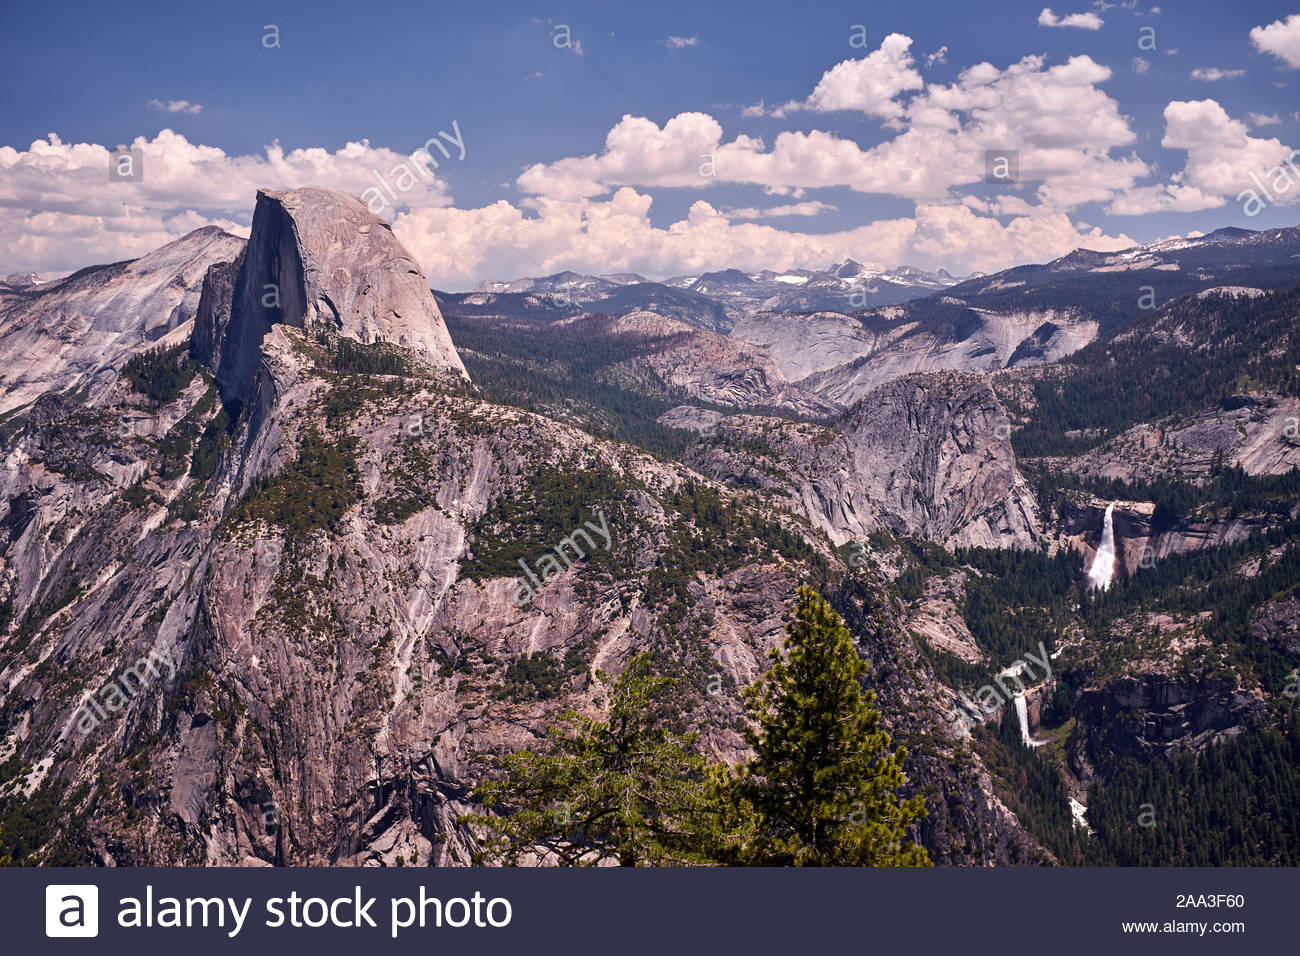 Half Dome With Nevada And Vernal Falls In The Background Yosemite